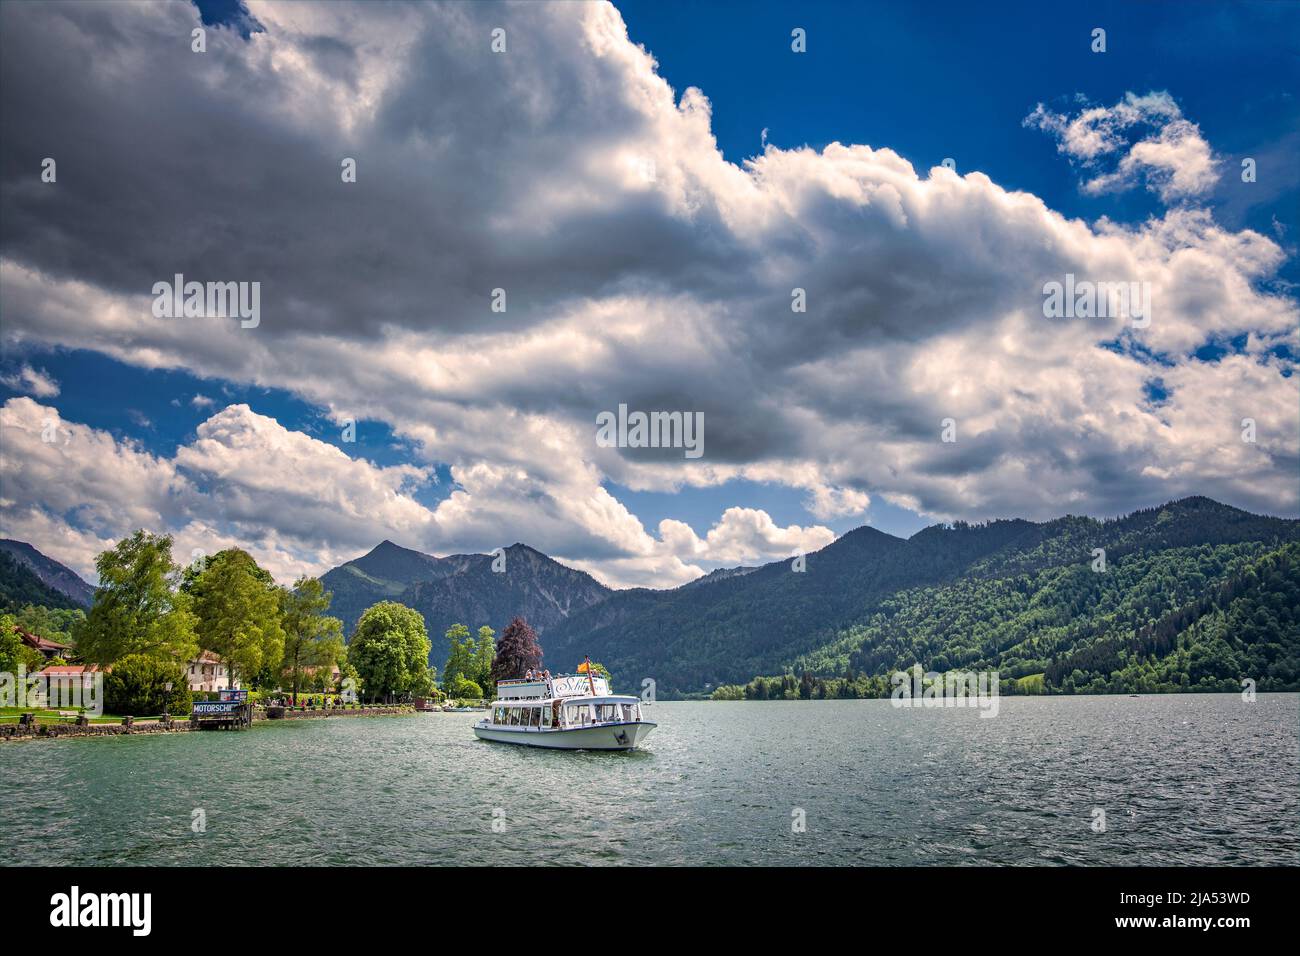 DE - BAVARIA: Boat excursion on Lake Schliersee in the Bavarian Alps Stock Photo